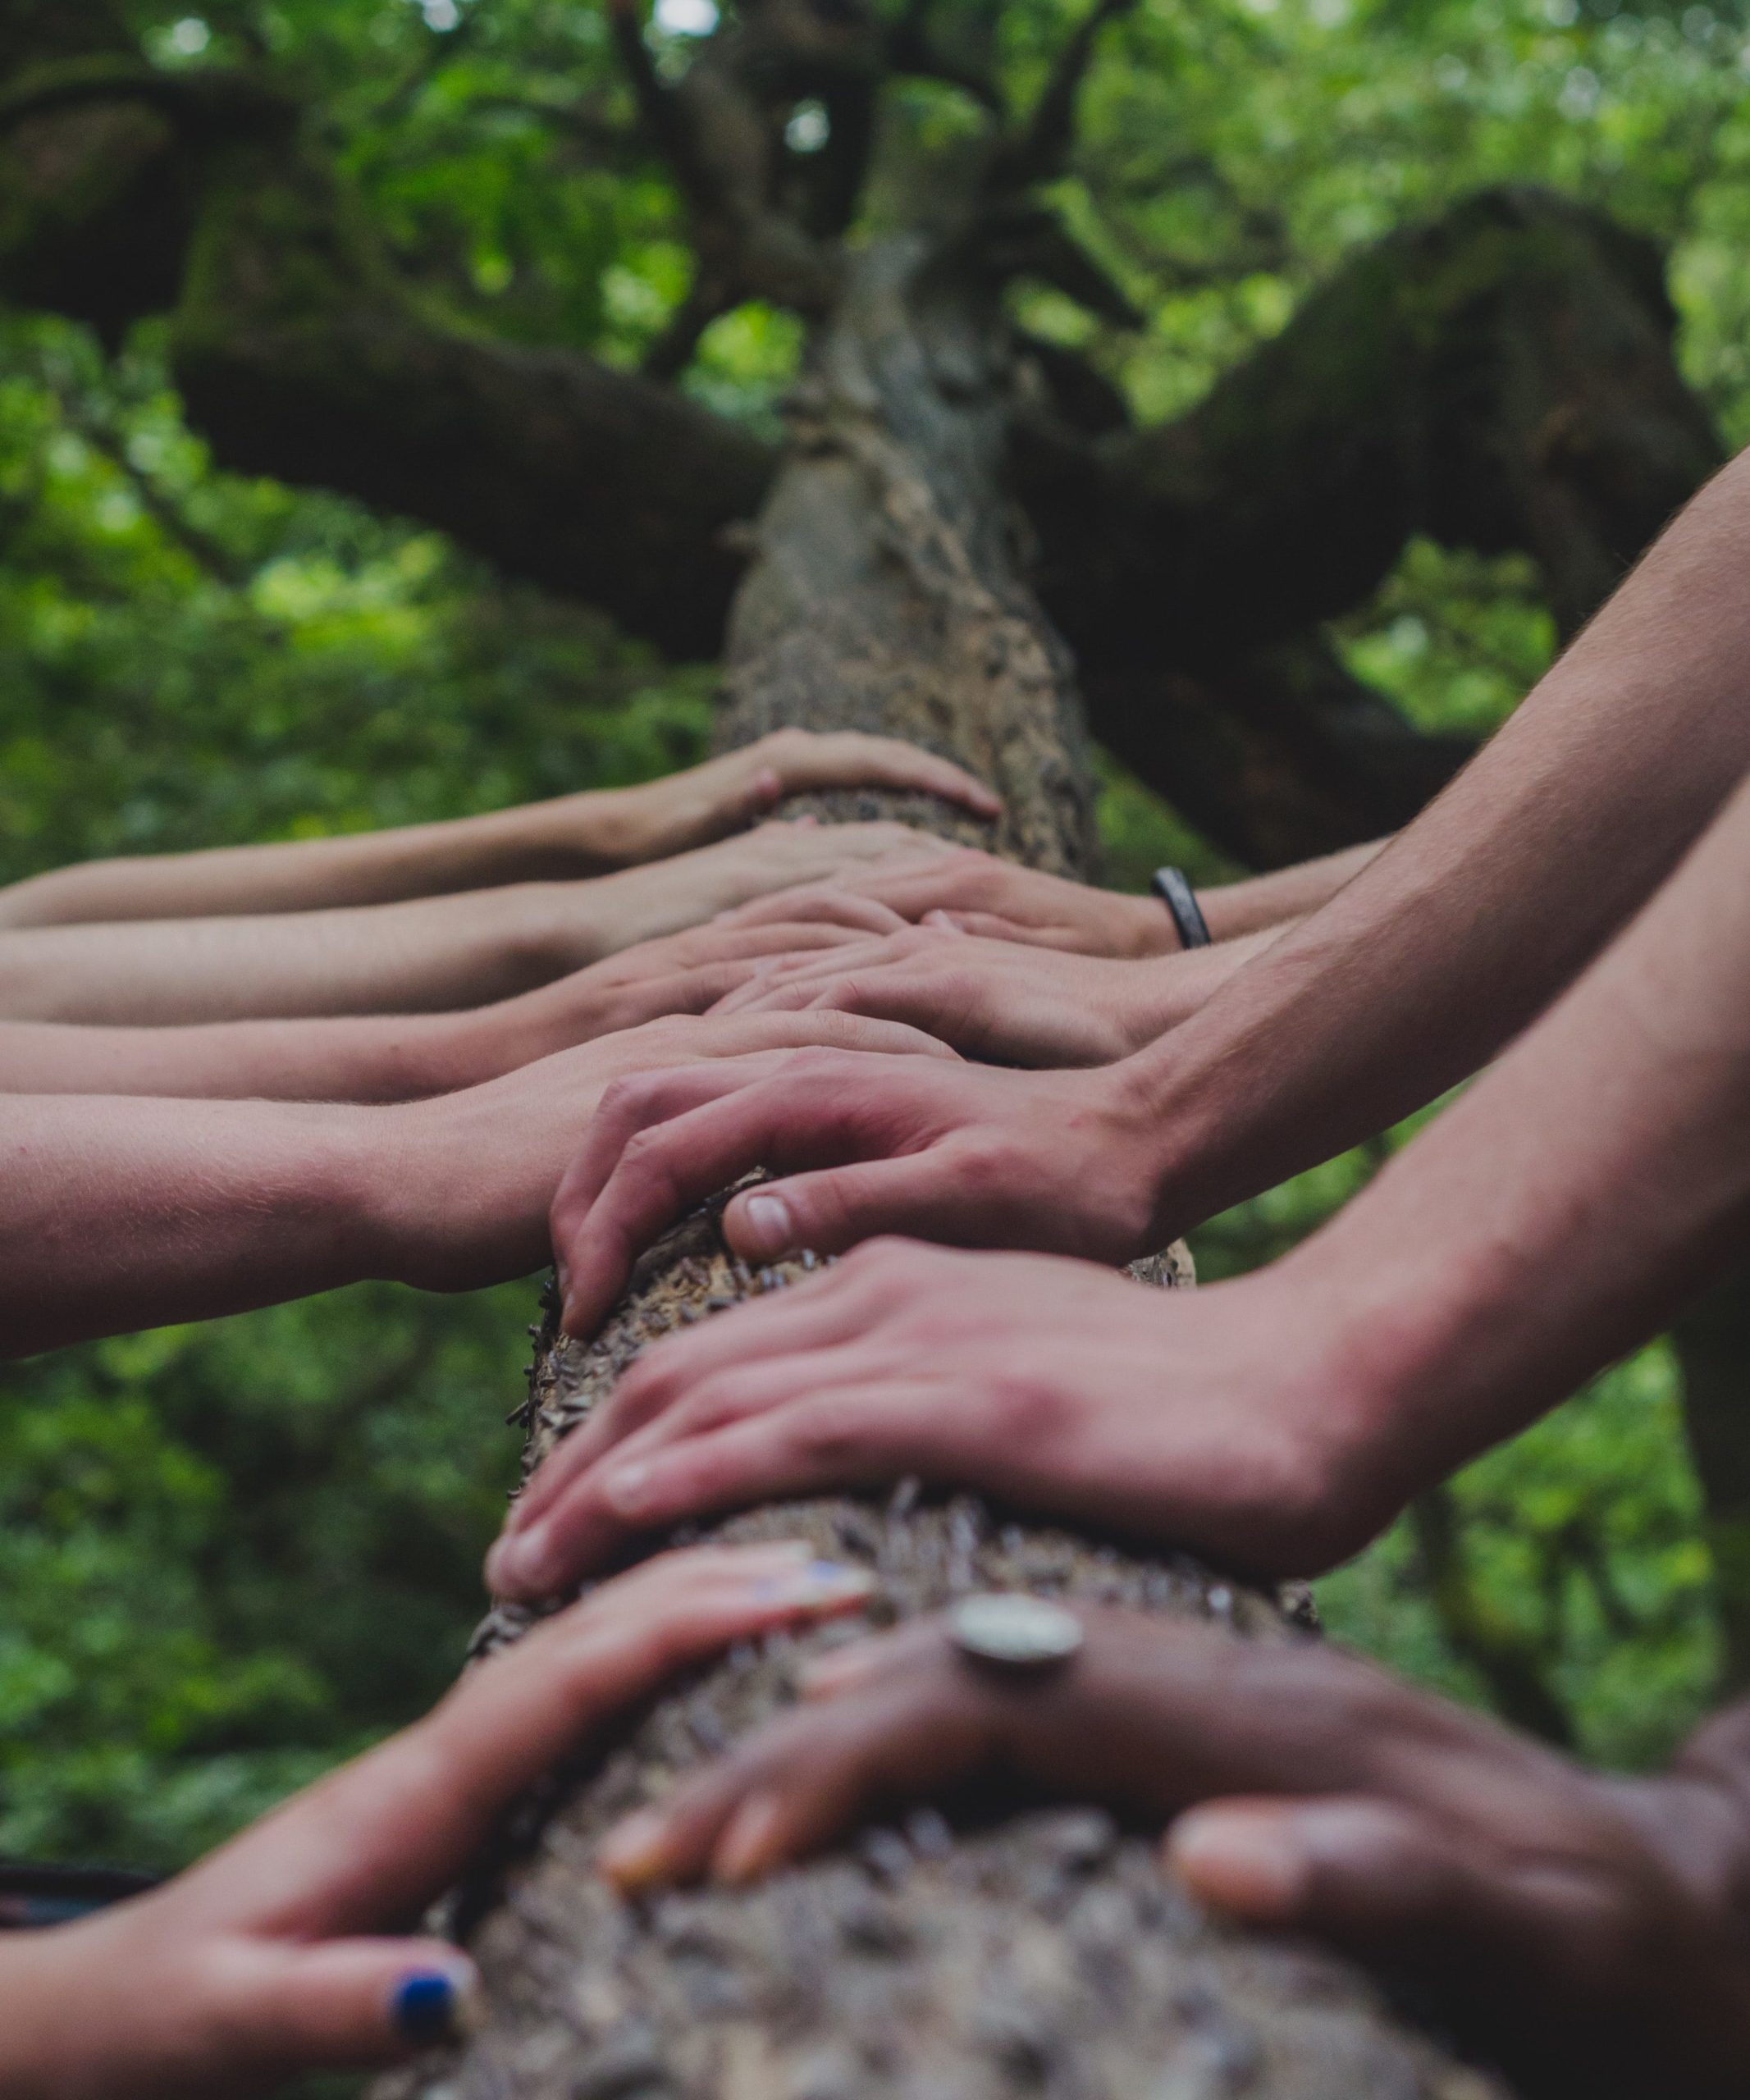 People's hands lined up in a row going up a tree branch 